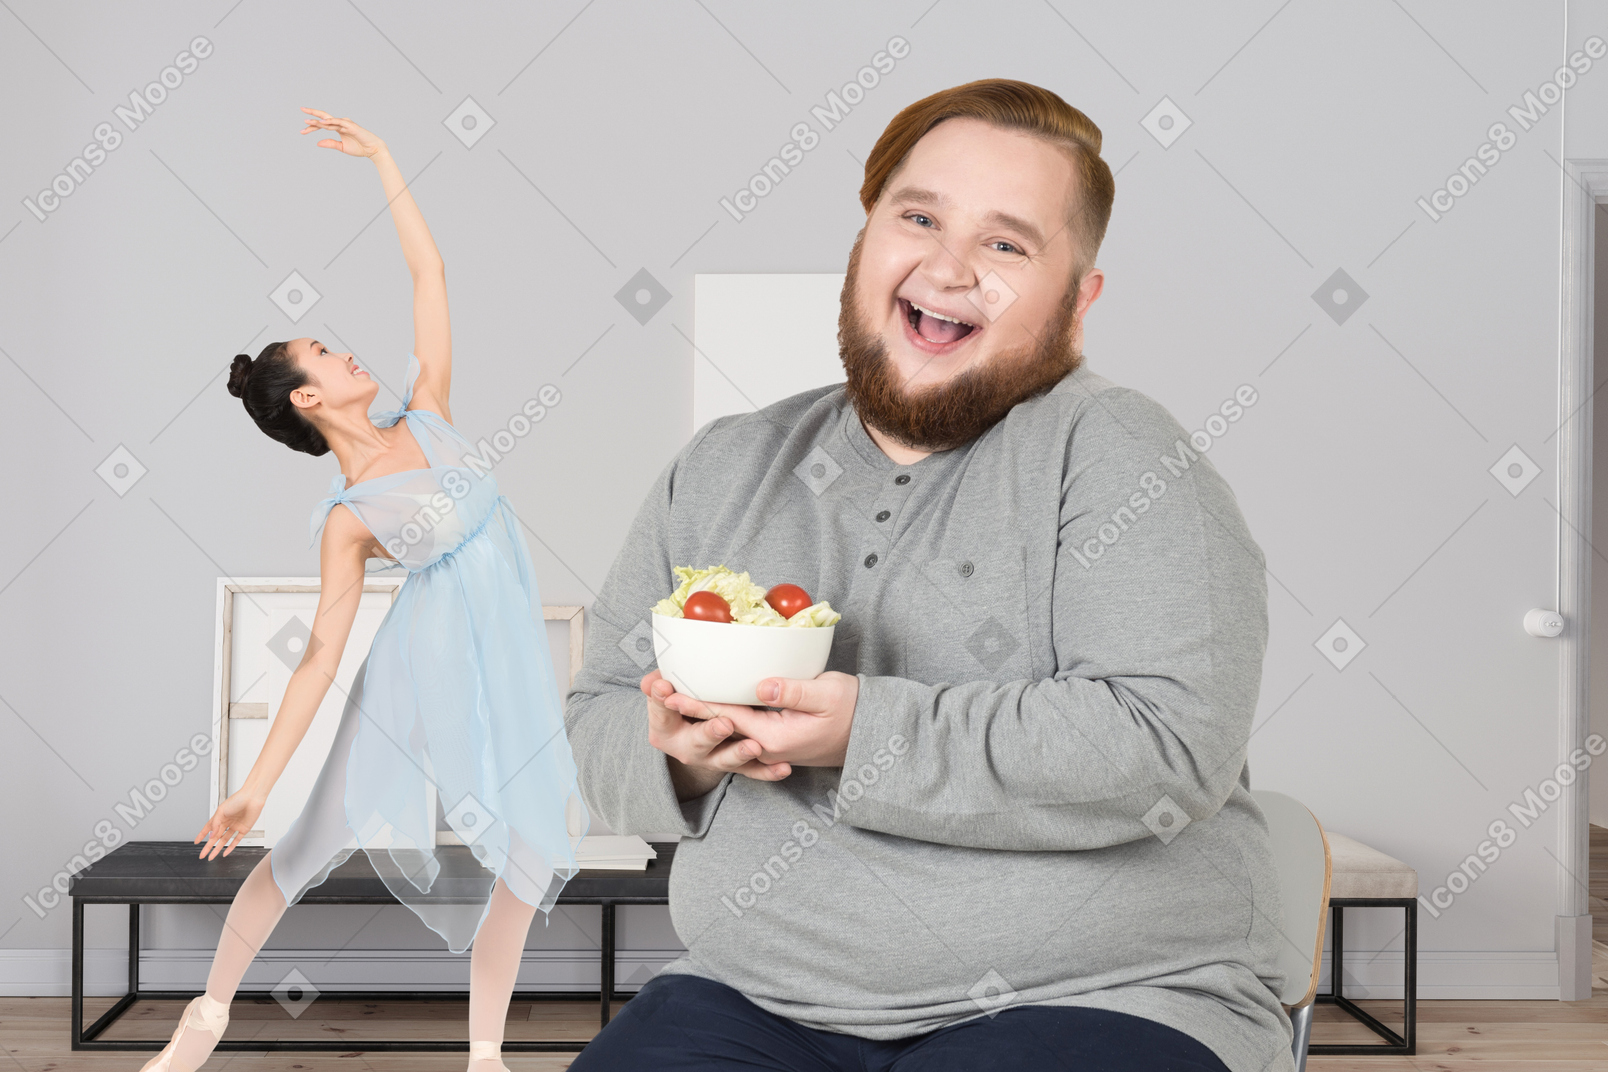 A man with a bowl of salad next to a woman dancing